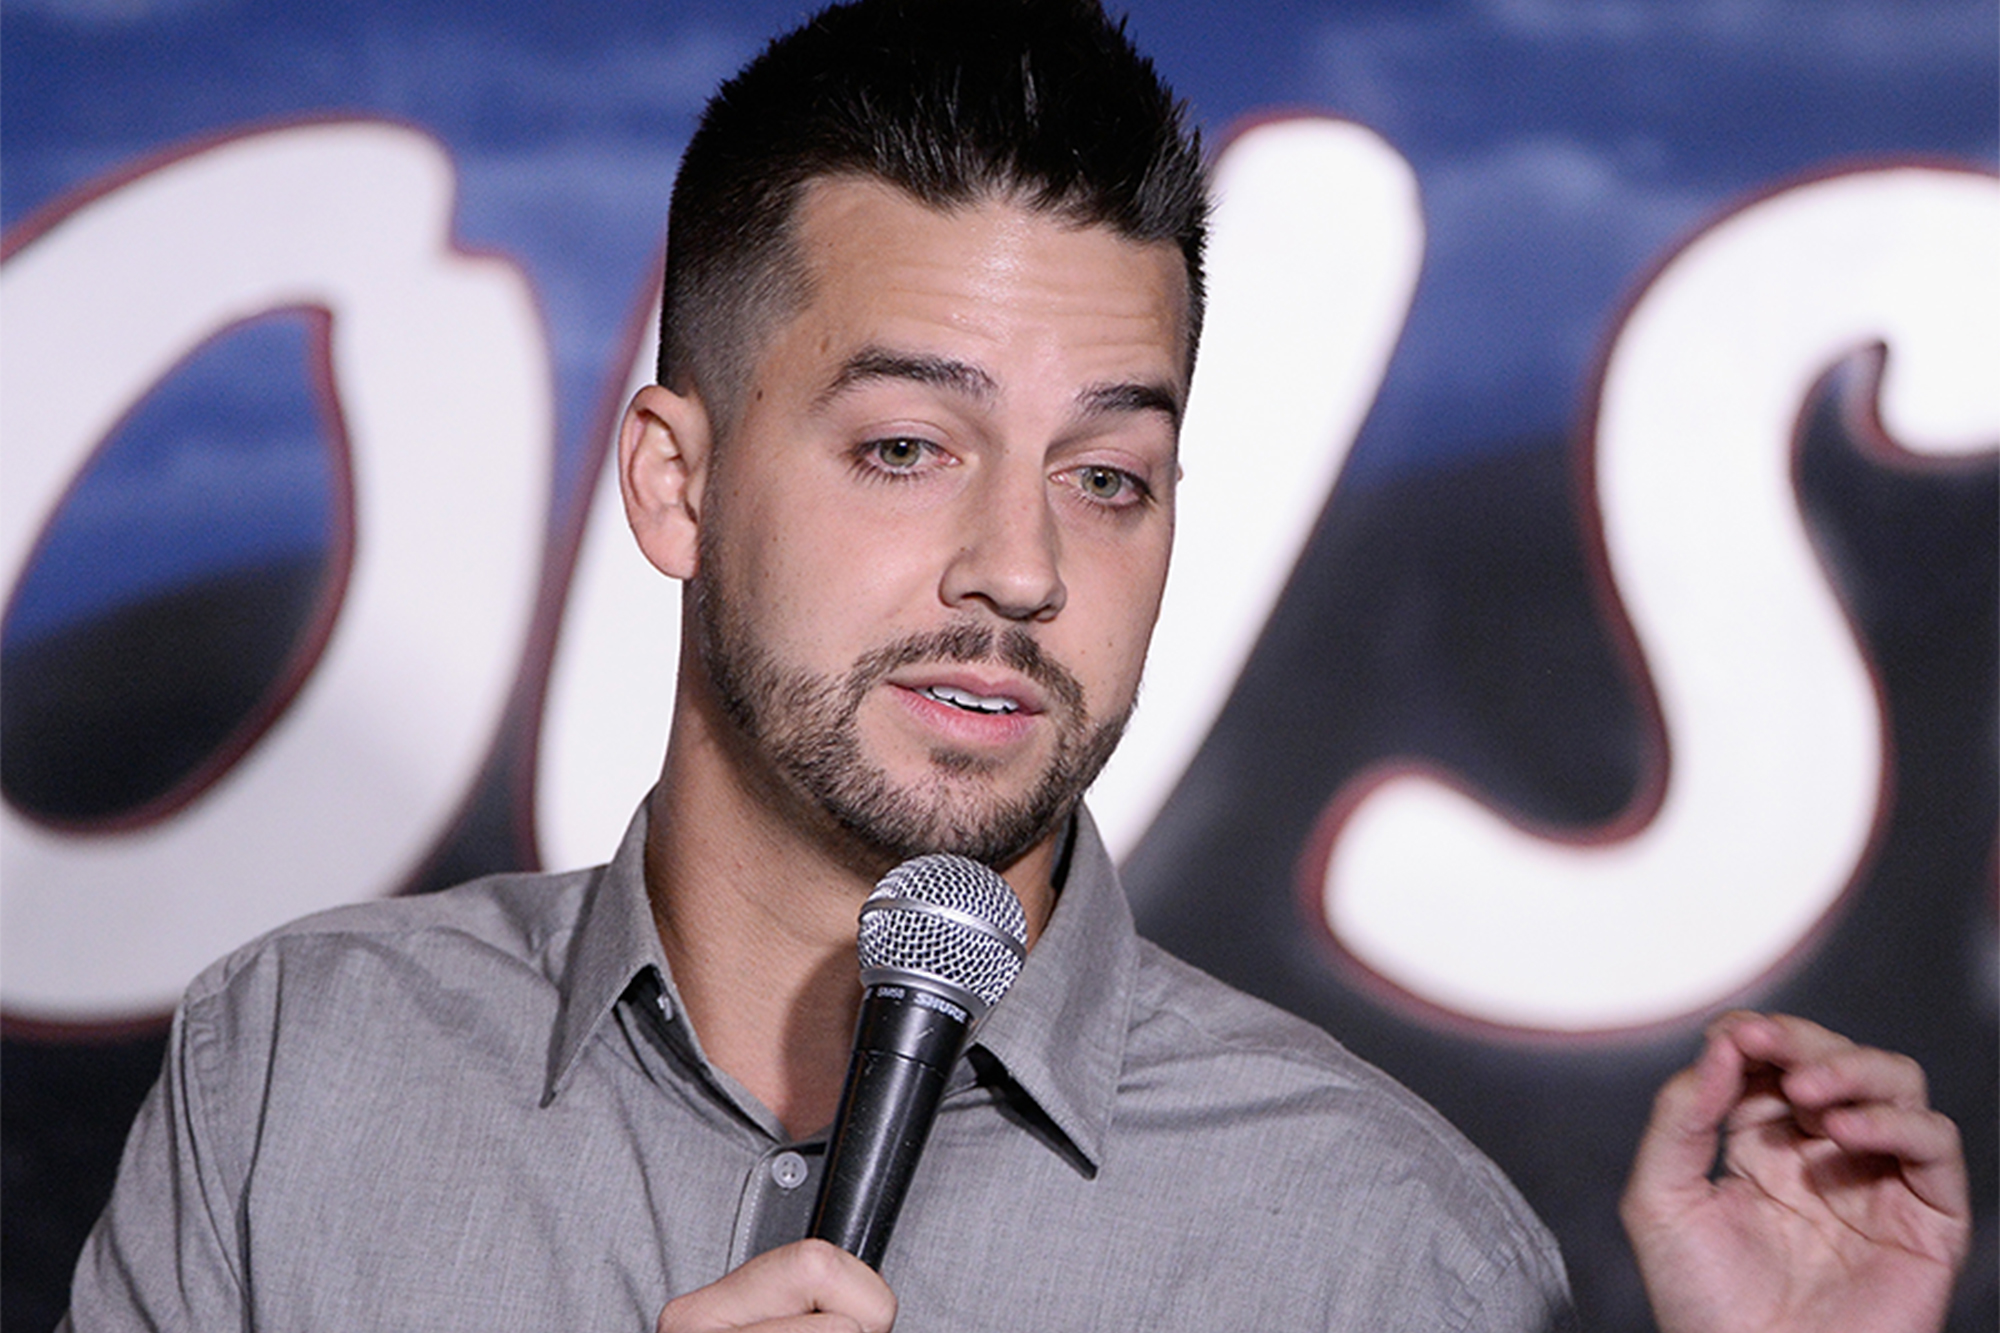 John Crist returns to social media after sexual misconduct allegations